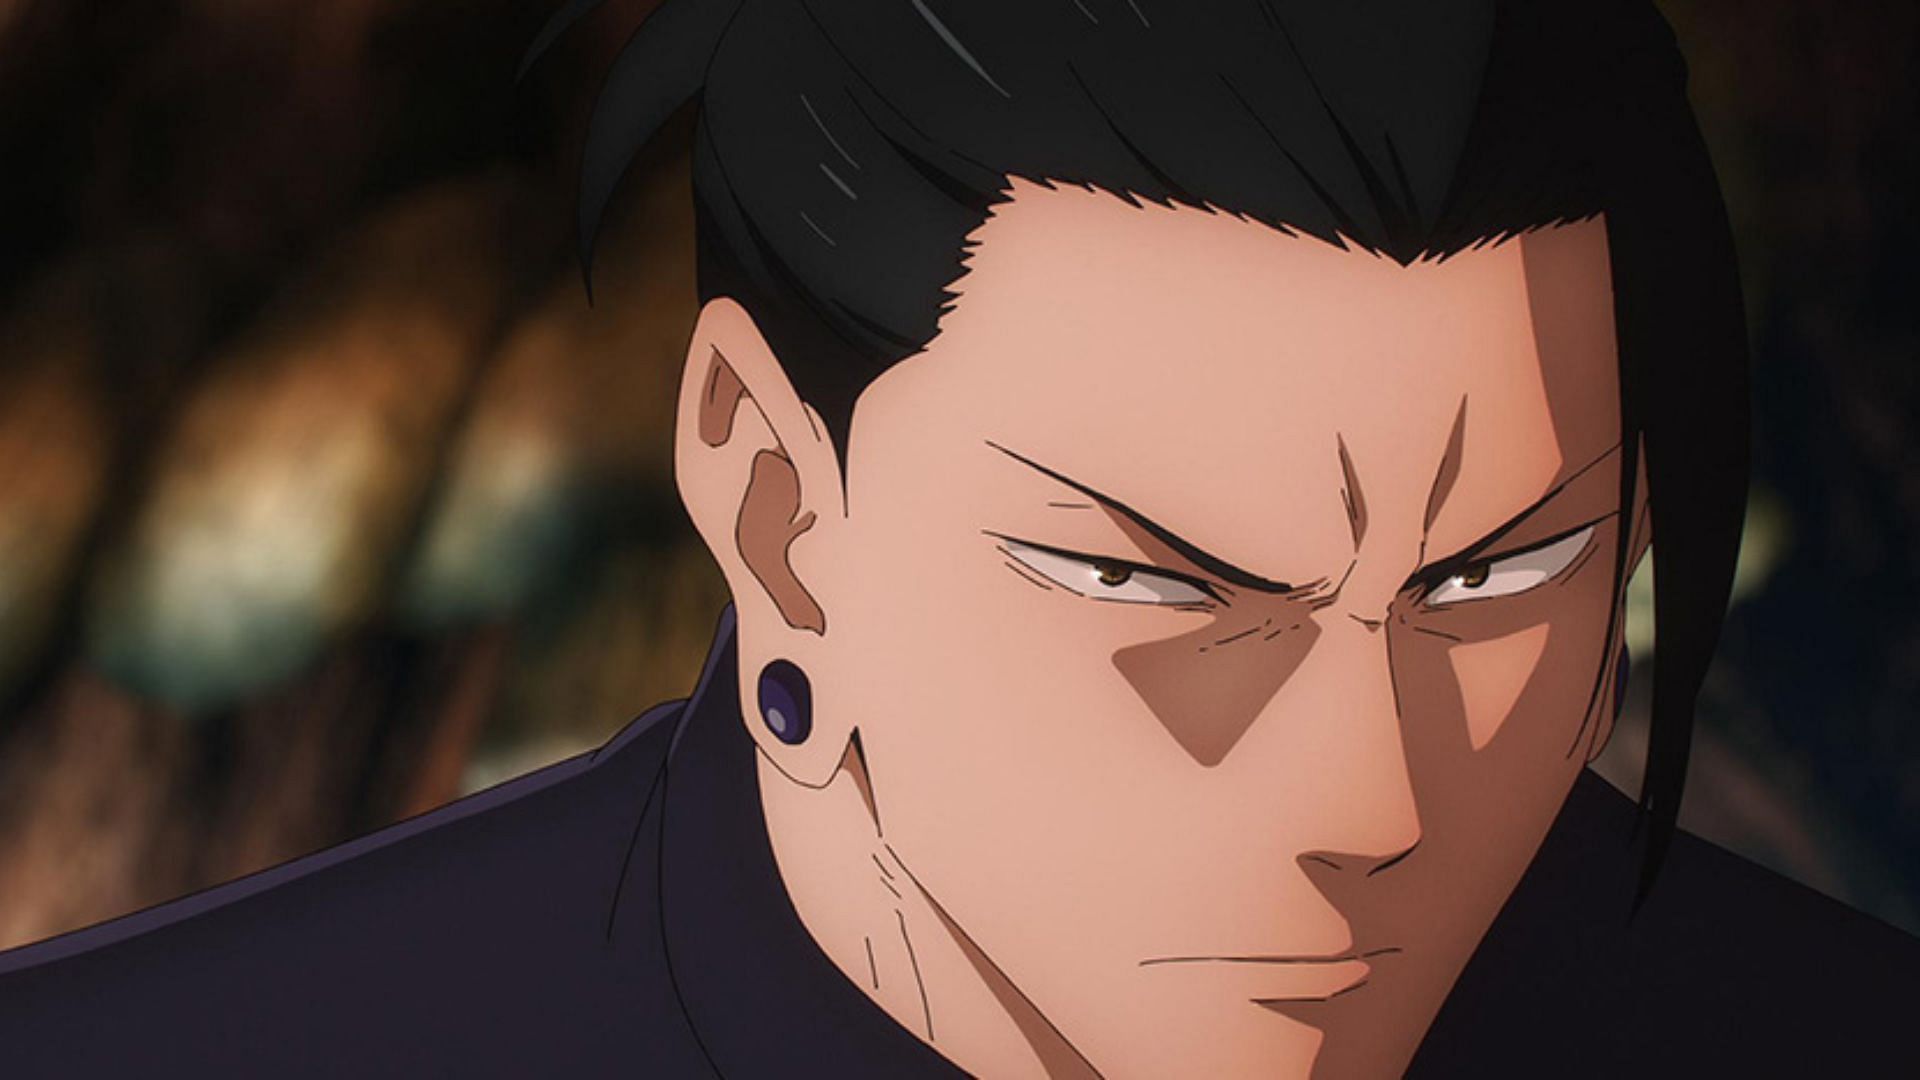 Jujutsu Kaisen season 2 episode 4: Gojo returns from the dead to fight Toji  after Geto loses the battle